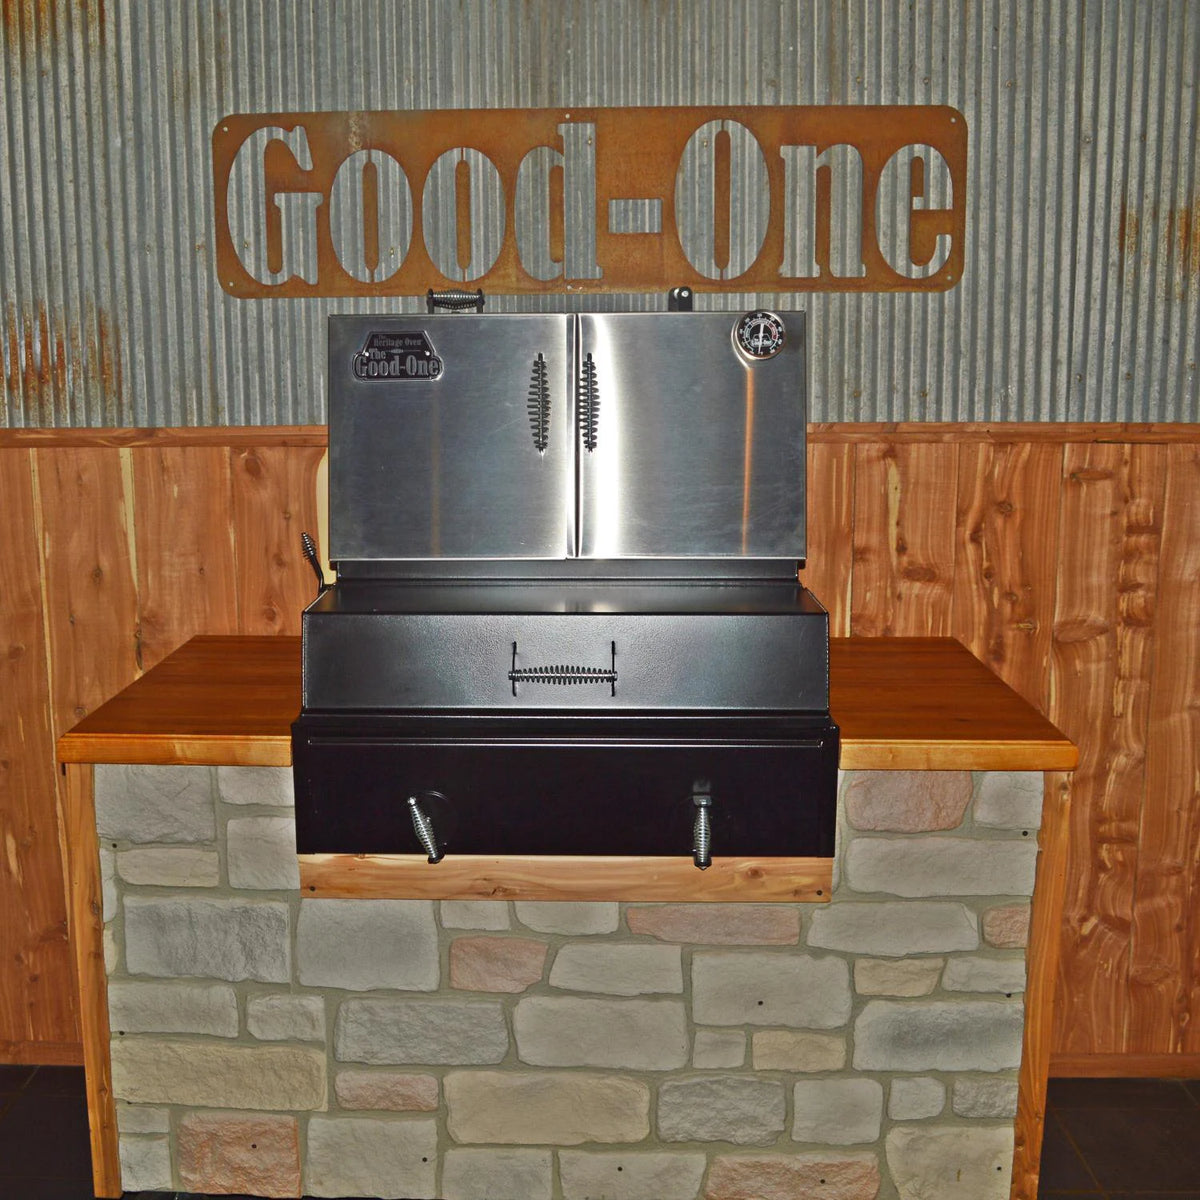 Good-One Manufacturing - 3059702 - Grill in Island Closed - Island sold separately